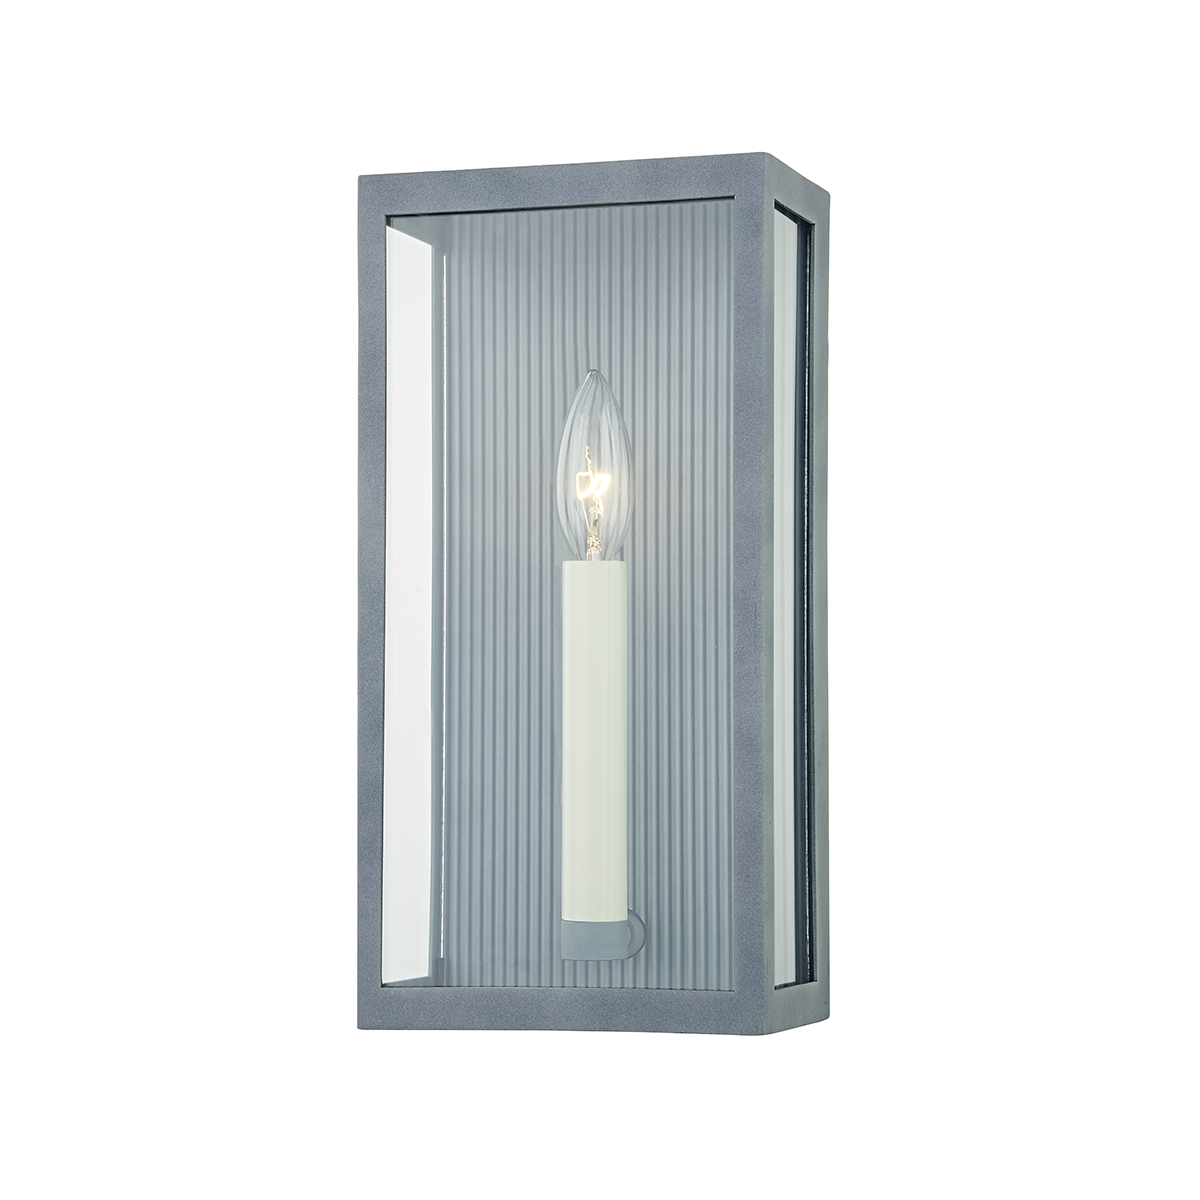 Troy VAIL 1 LIGHT EXTERIOR WALL SCONCE B1031 Outdoor l Wall Troy Lighting   